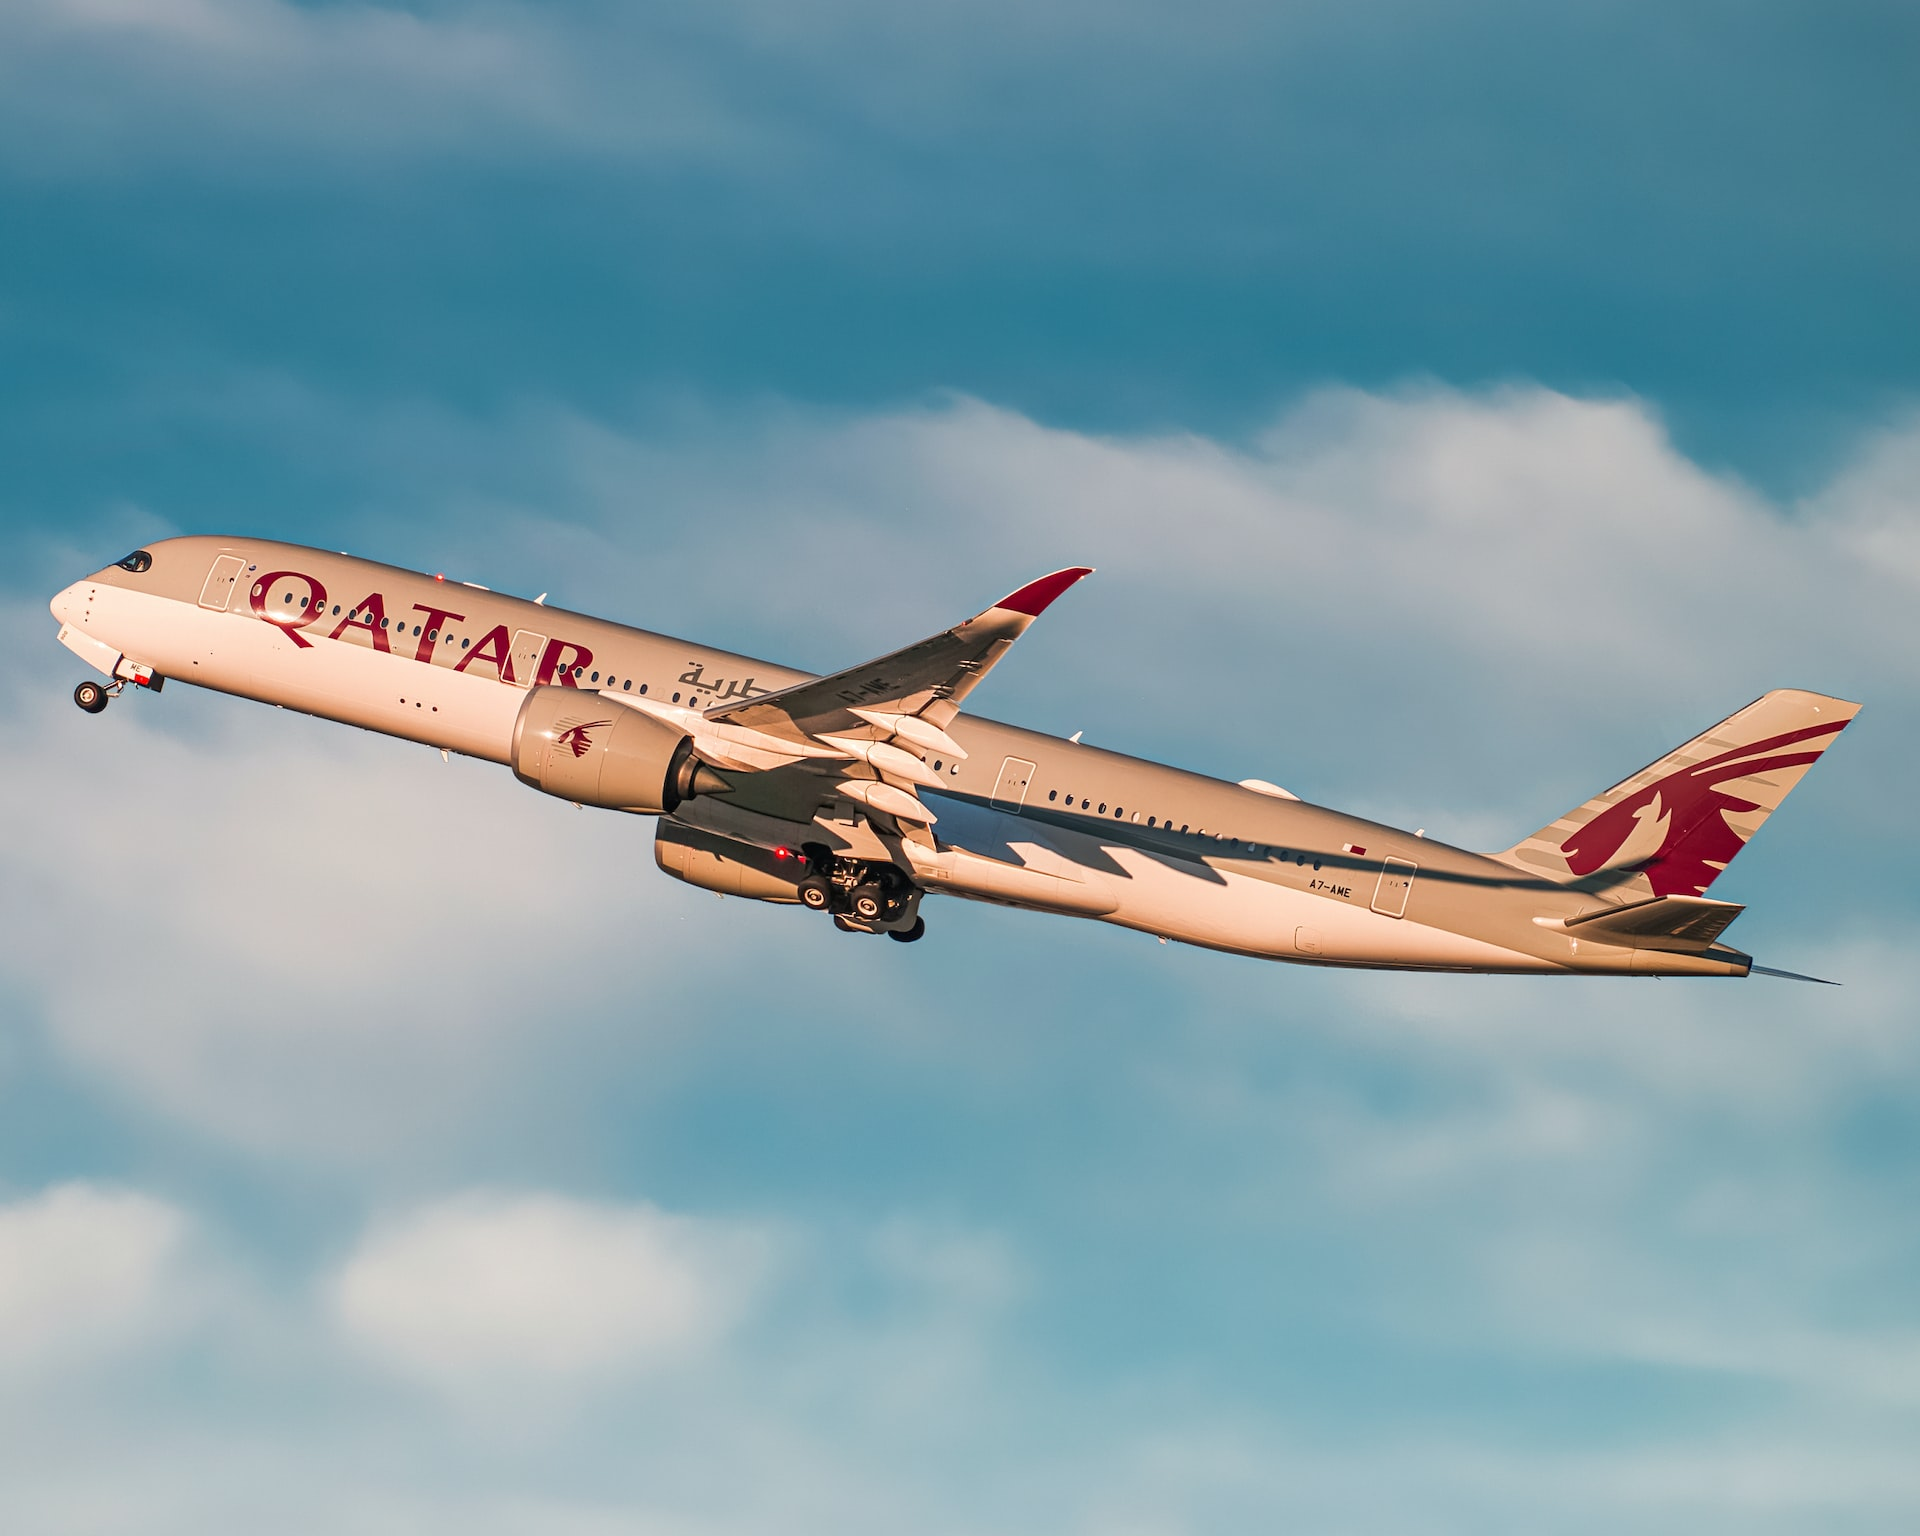 Qatar Airways aircraft taking off, the best airline to work for as a flight attendant.